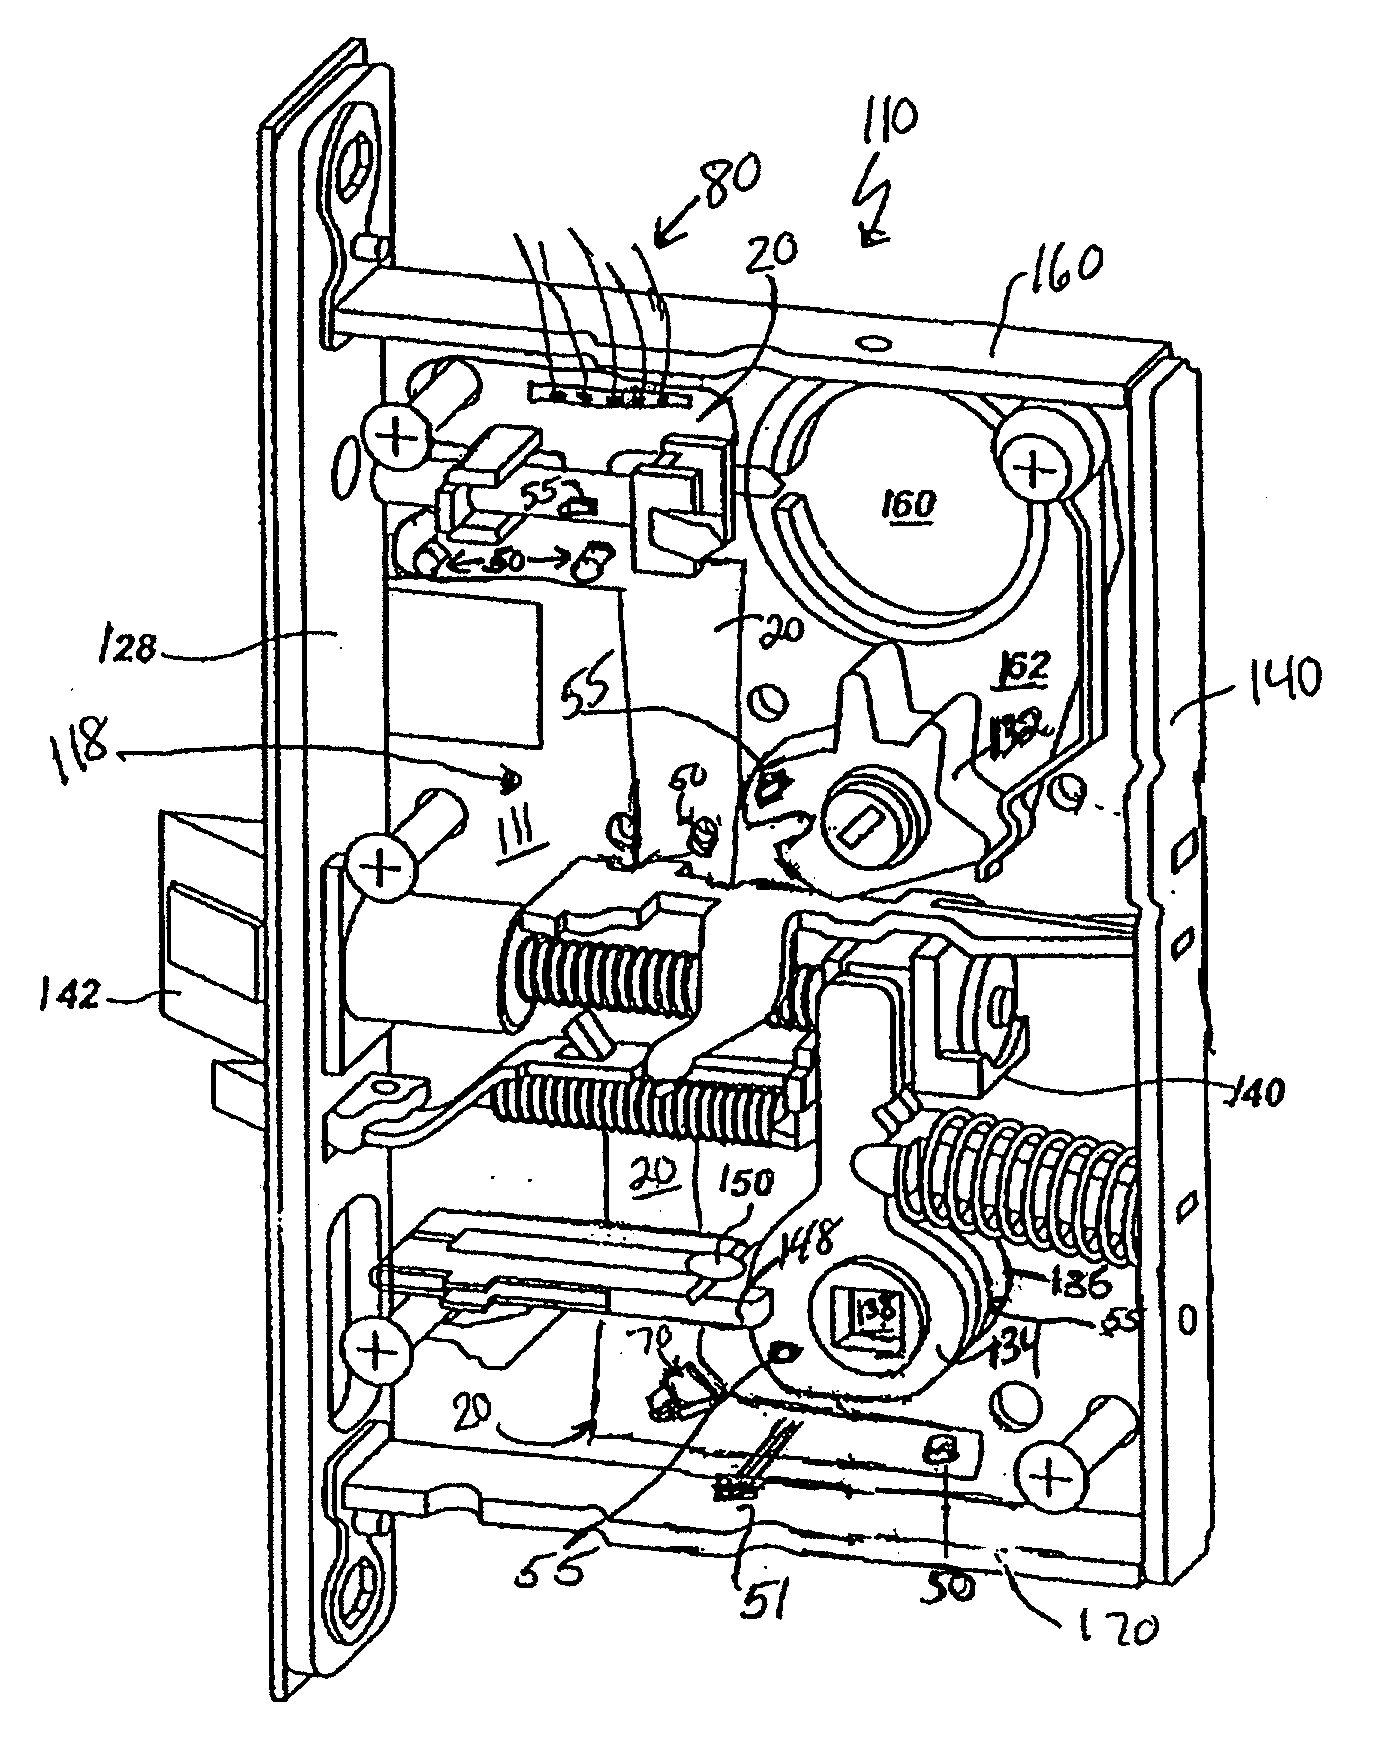 Locking device with embedded circuit board